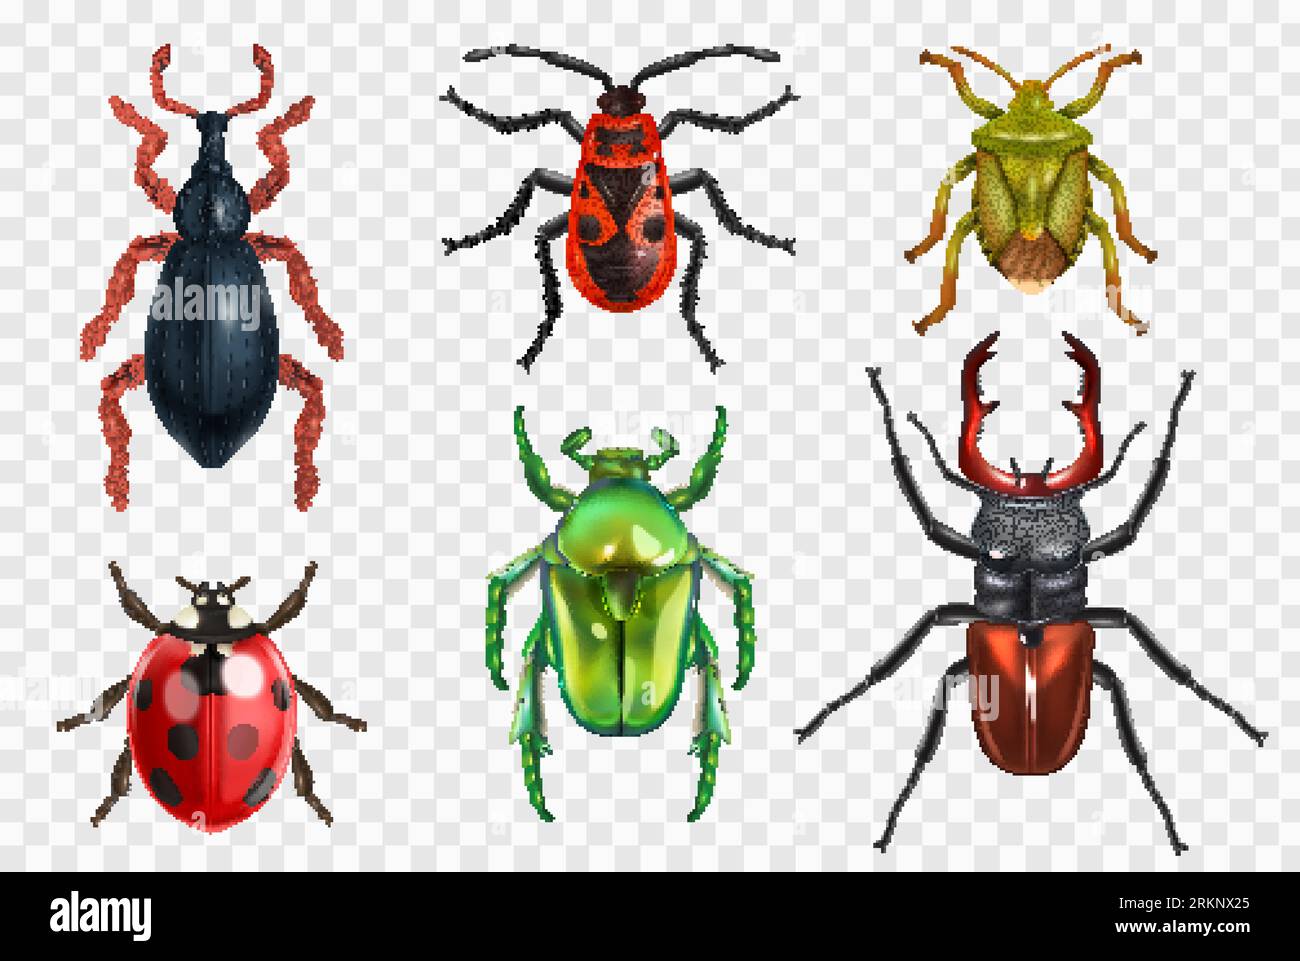 Realistic insect beetle bug set of isolated images on transparent background with colorful images of bugs vector illustration Stock Vector